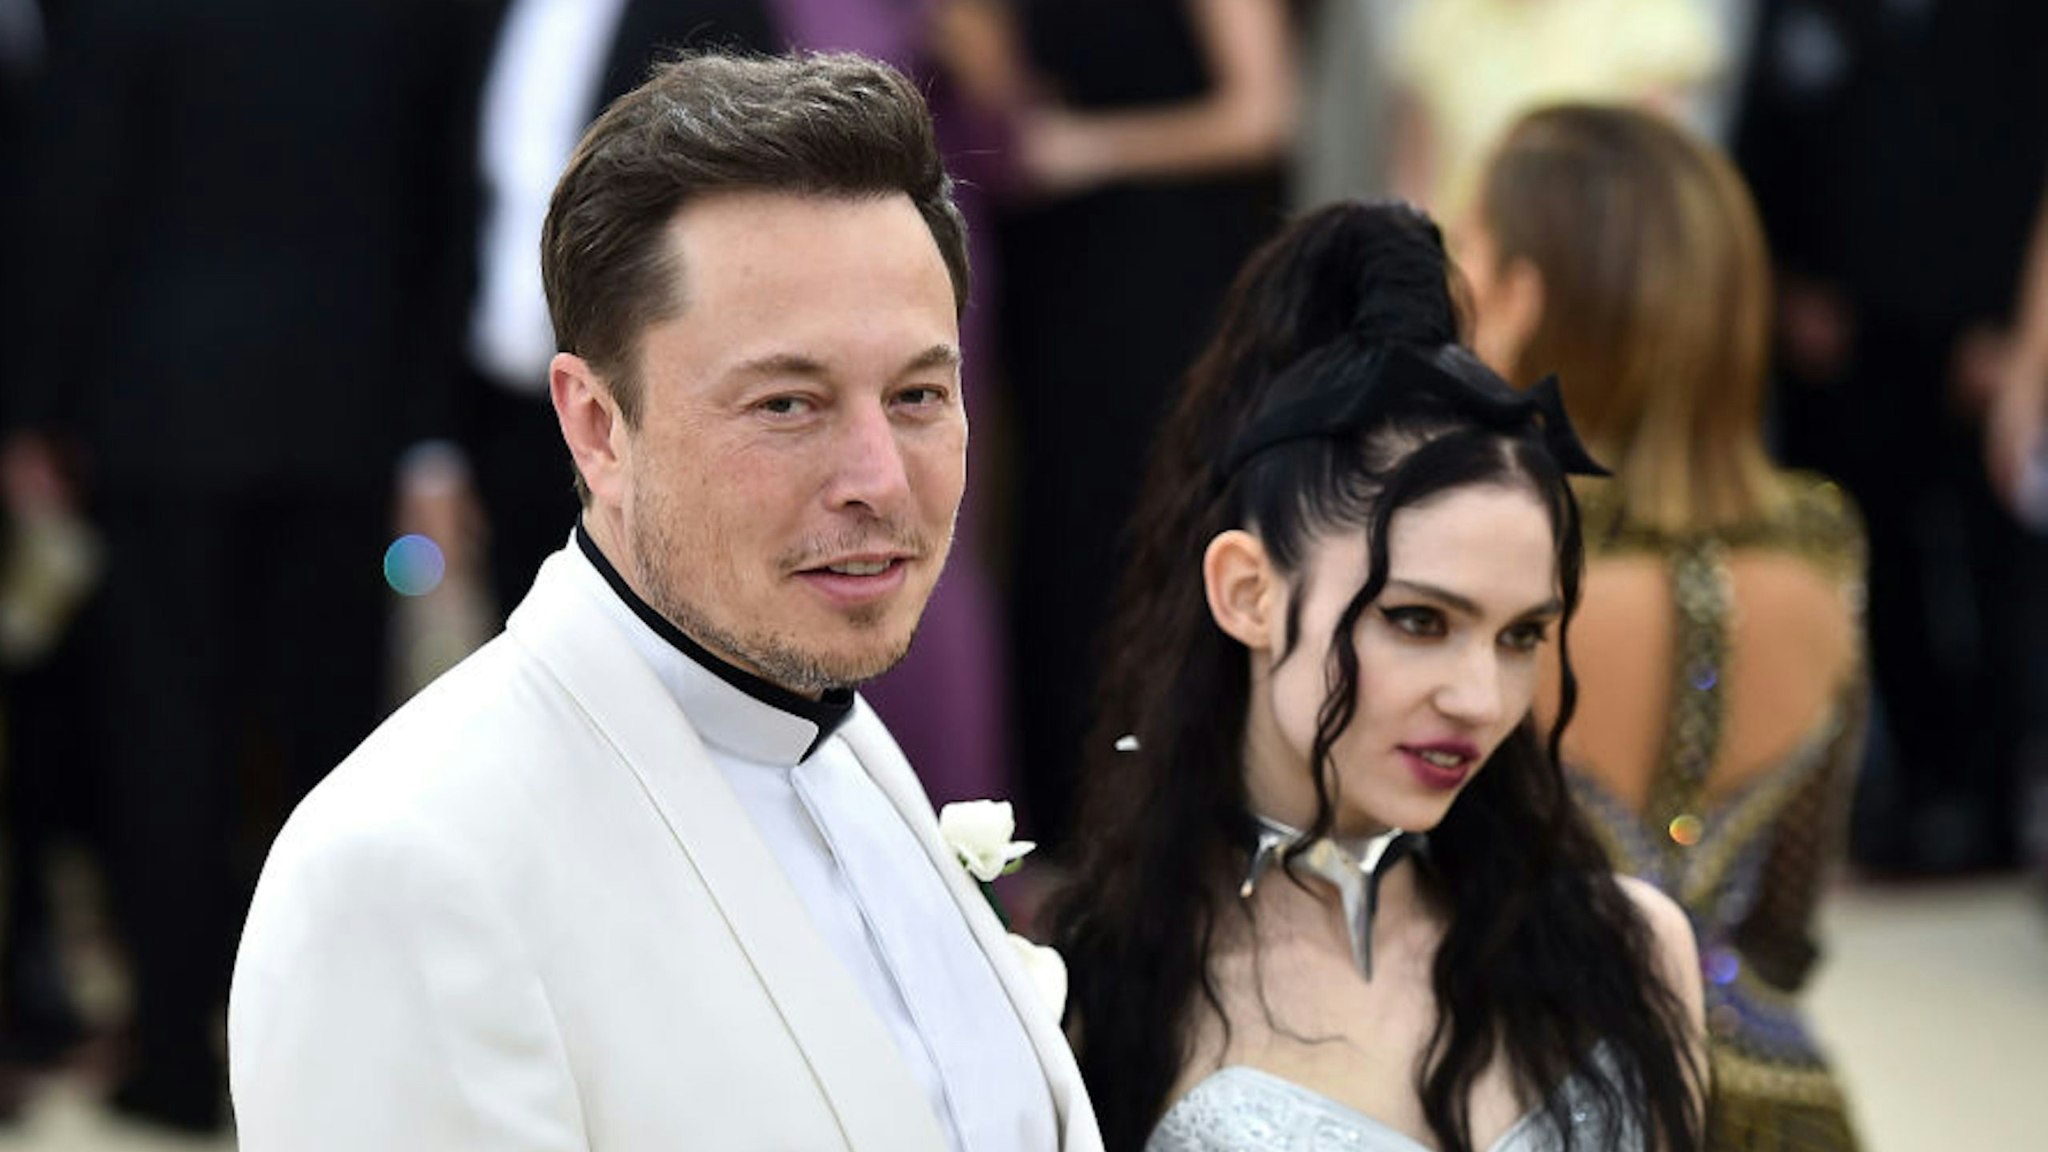 NEW YORK, NY - MAY 07: Elon Musk and Grimes attend the Heavenly Bodies: Fashion &amp; The Catholic Imagination Costume Institute Gala at The Metropolitan Museum of Art on May 7, 2018 in New York City.